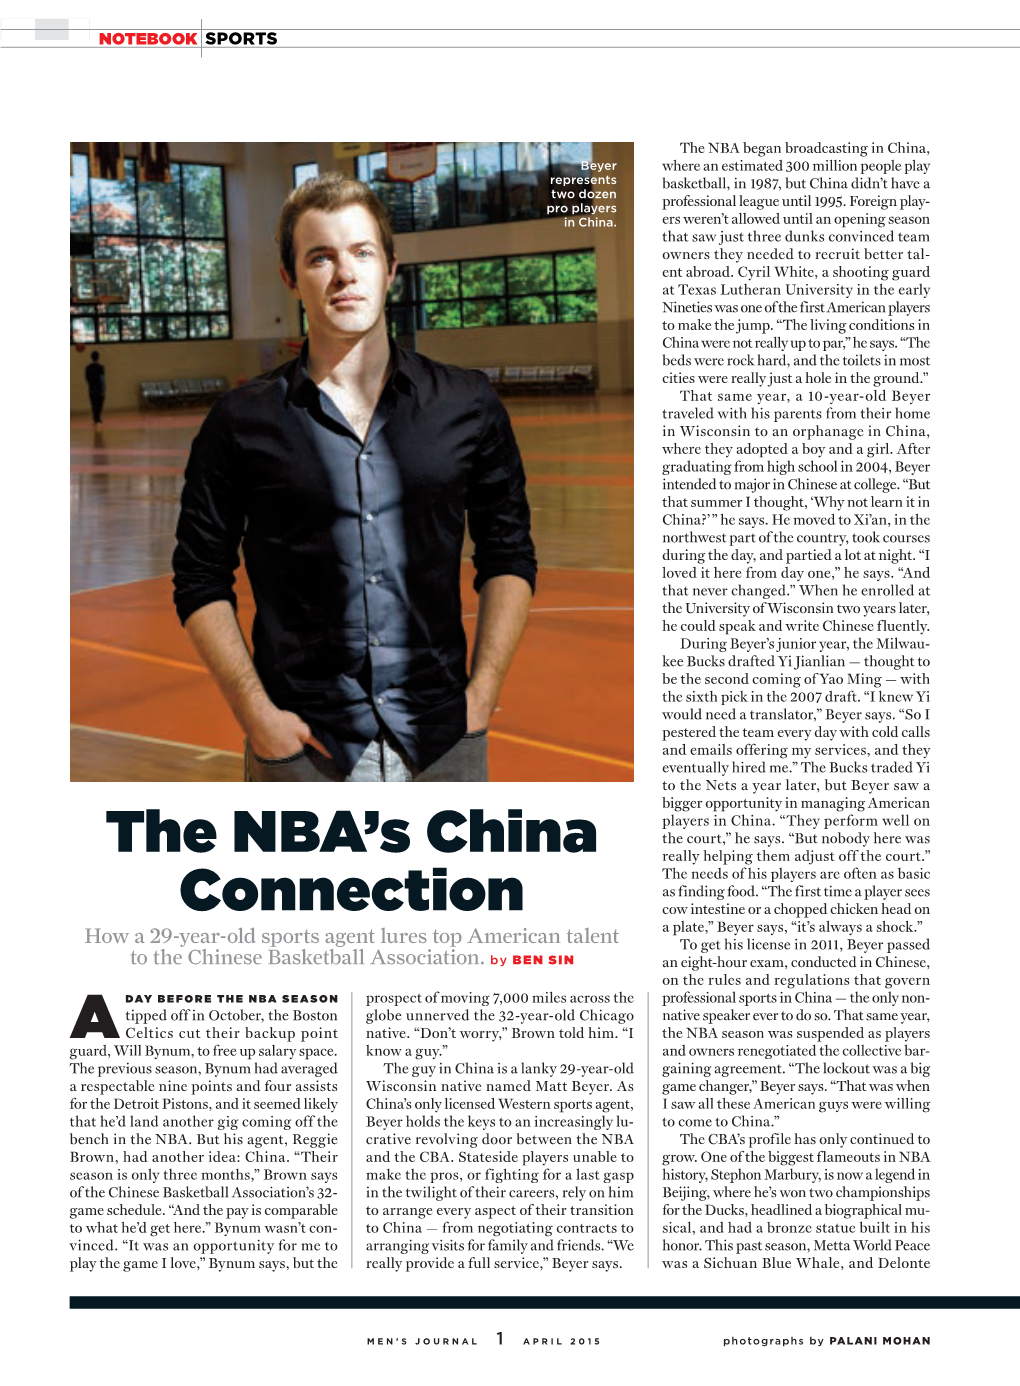 The NBA's China Connection